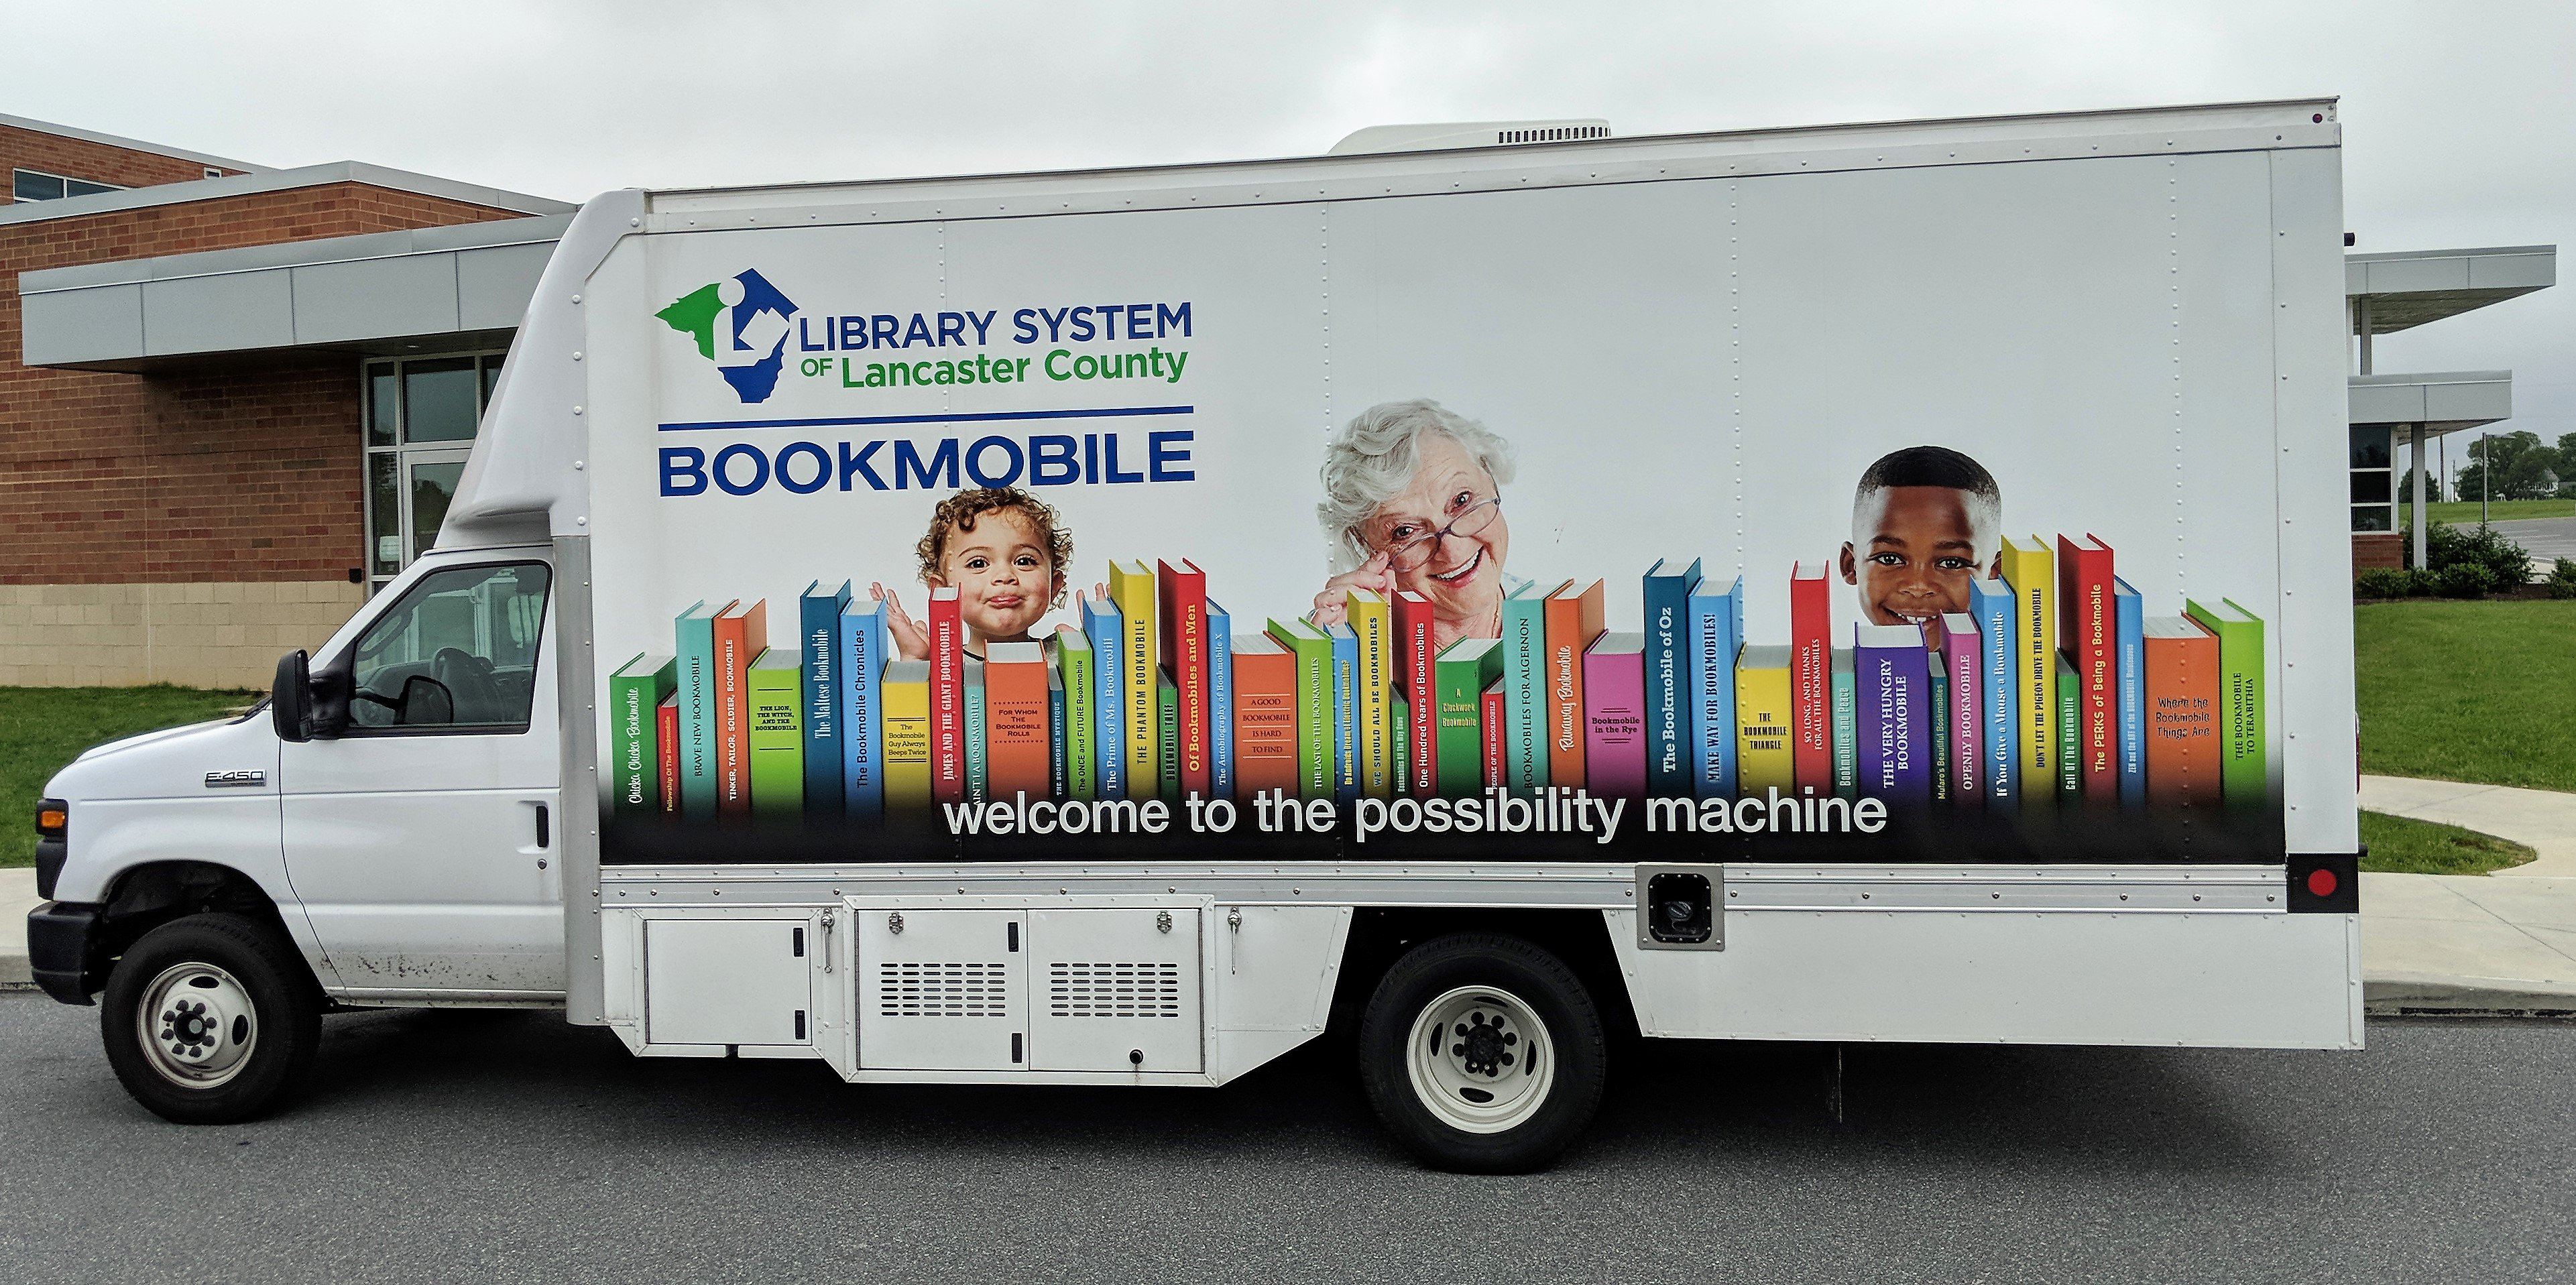 Library System of Lancaster County bookmobile